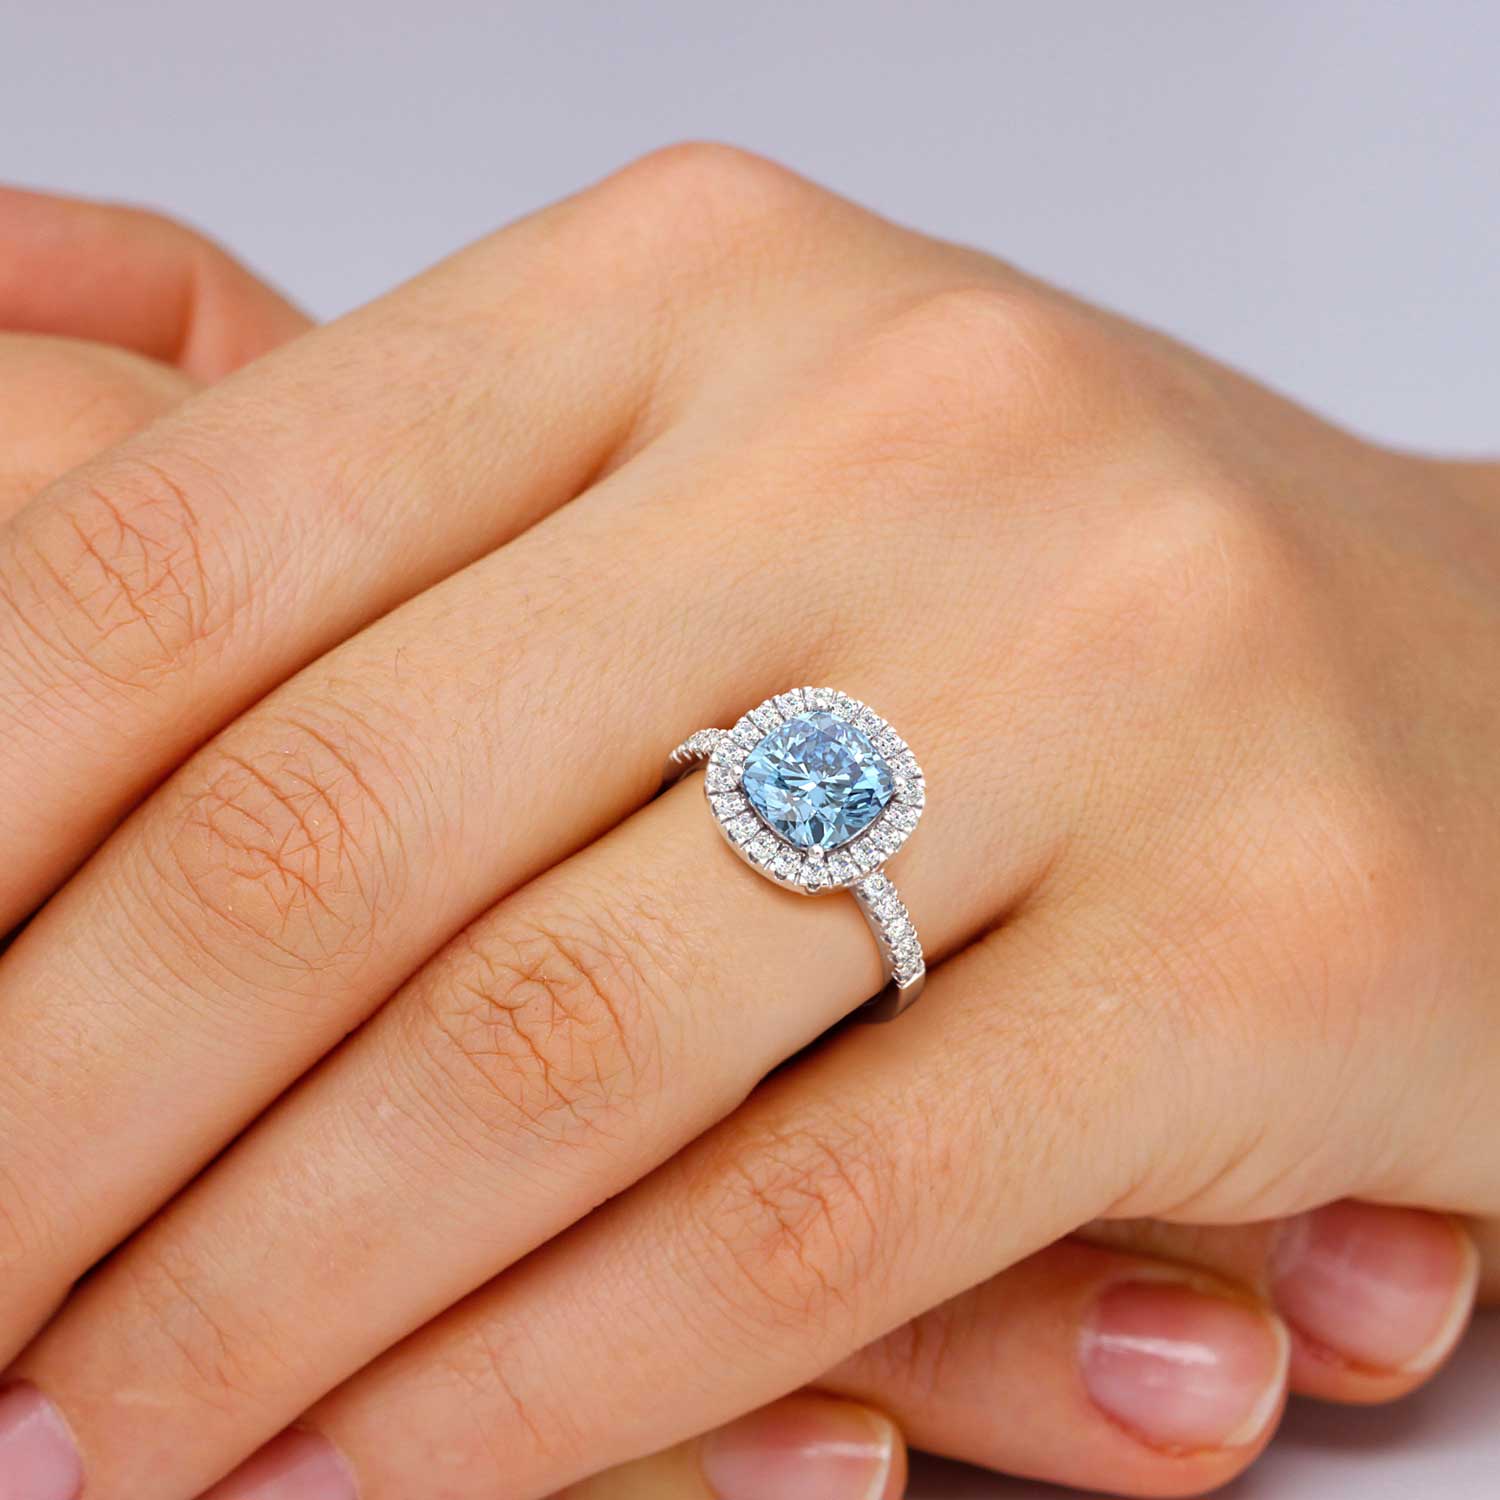 A breathtaking cushion-cut topaz halo ring, elegantly displayed on the hand. The mesmerizing blue hue of the topaz gemstone, accentuated by a shimmering halo of diamonds, exudes sophistication and charm, creating a striking piece of jewelry.